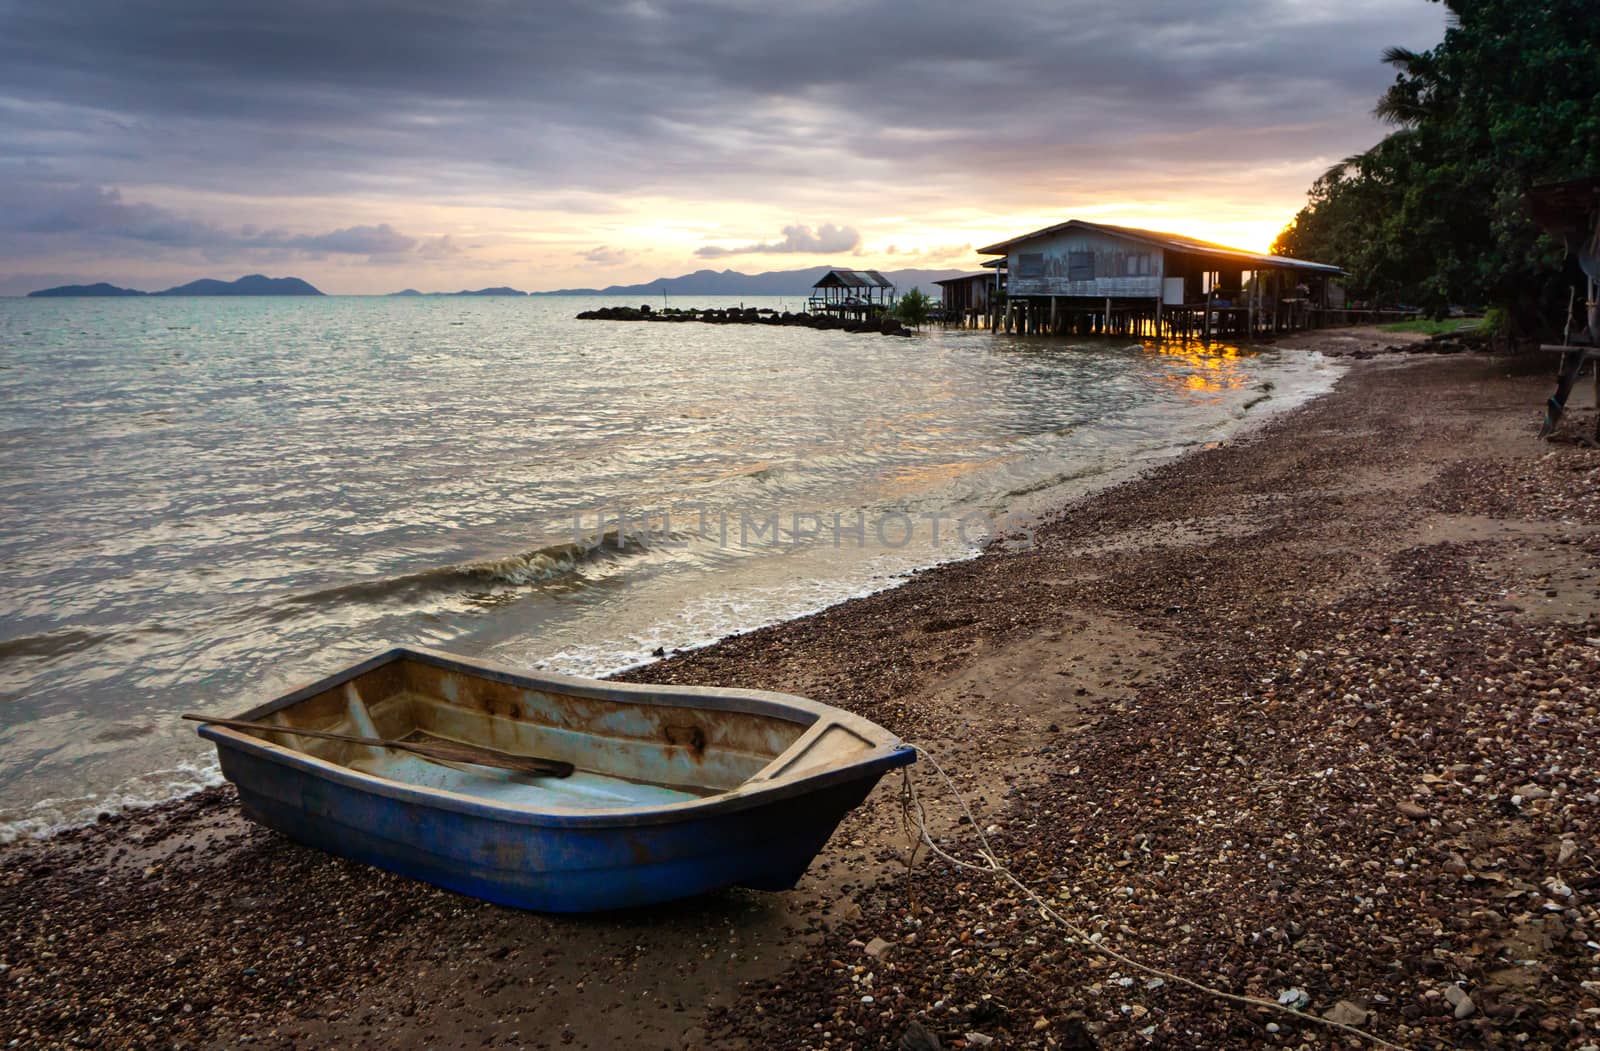 Fishing boat parked in the beach at sunset time in Thailand.